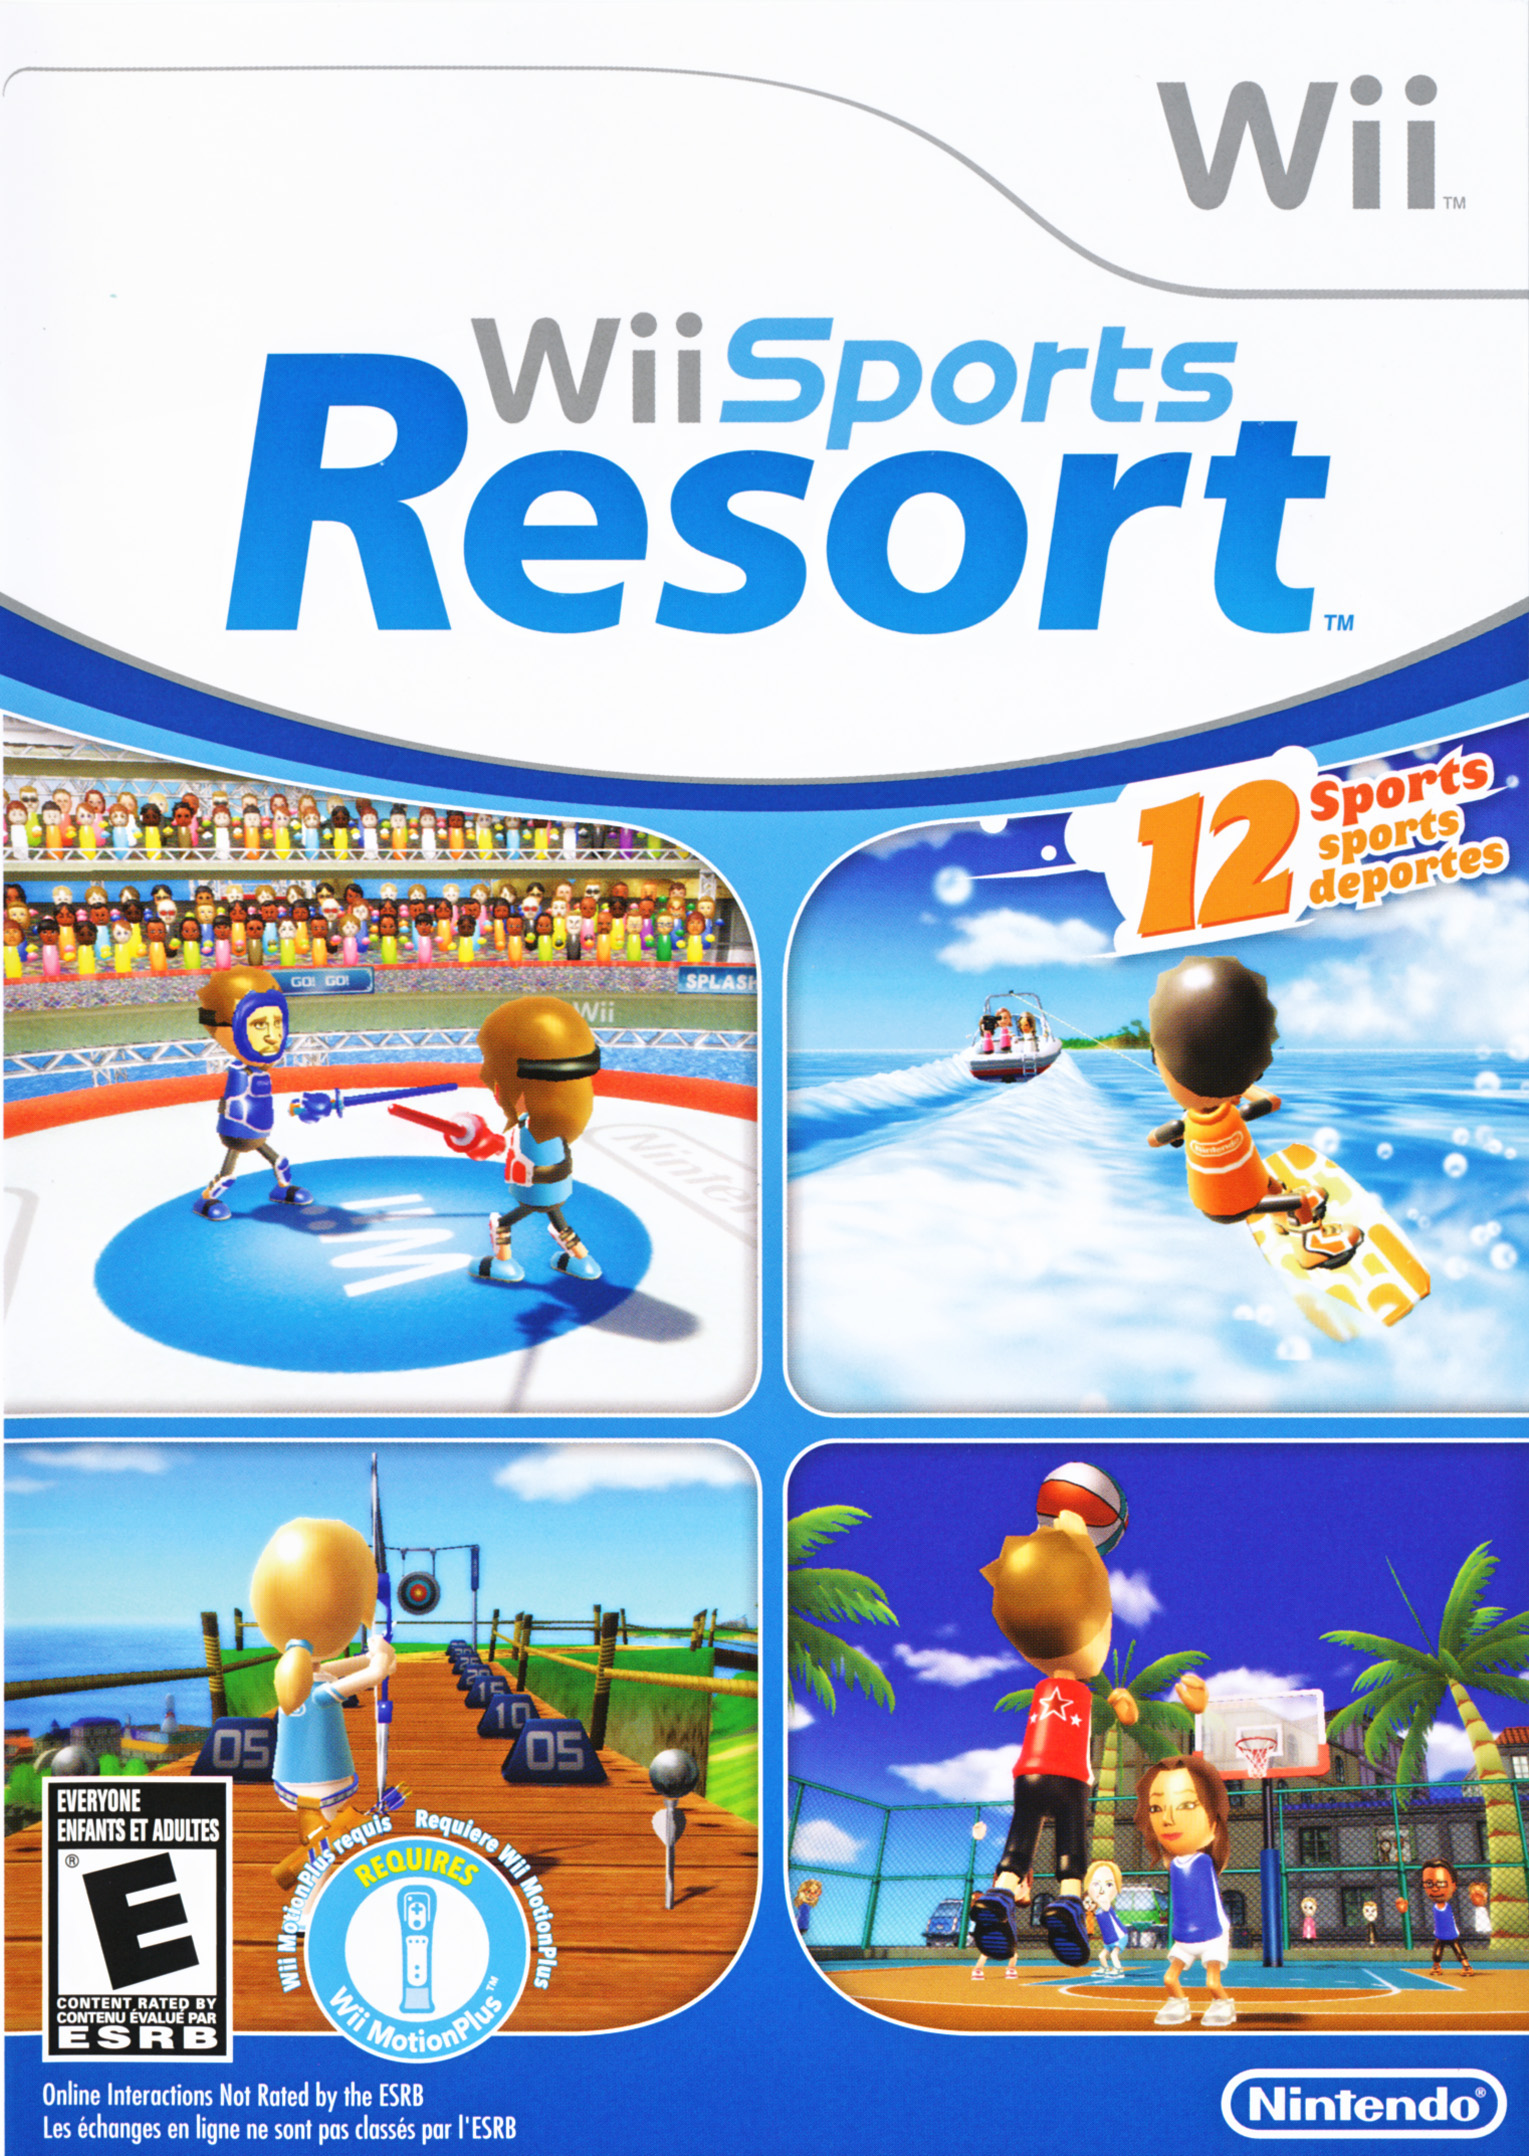 Wii Sports Resort Picture.